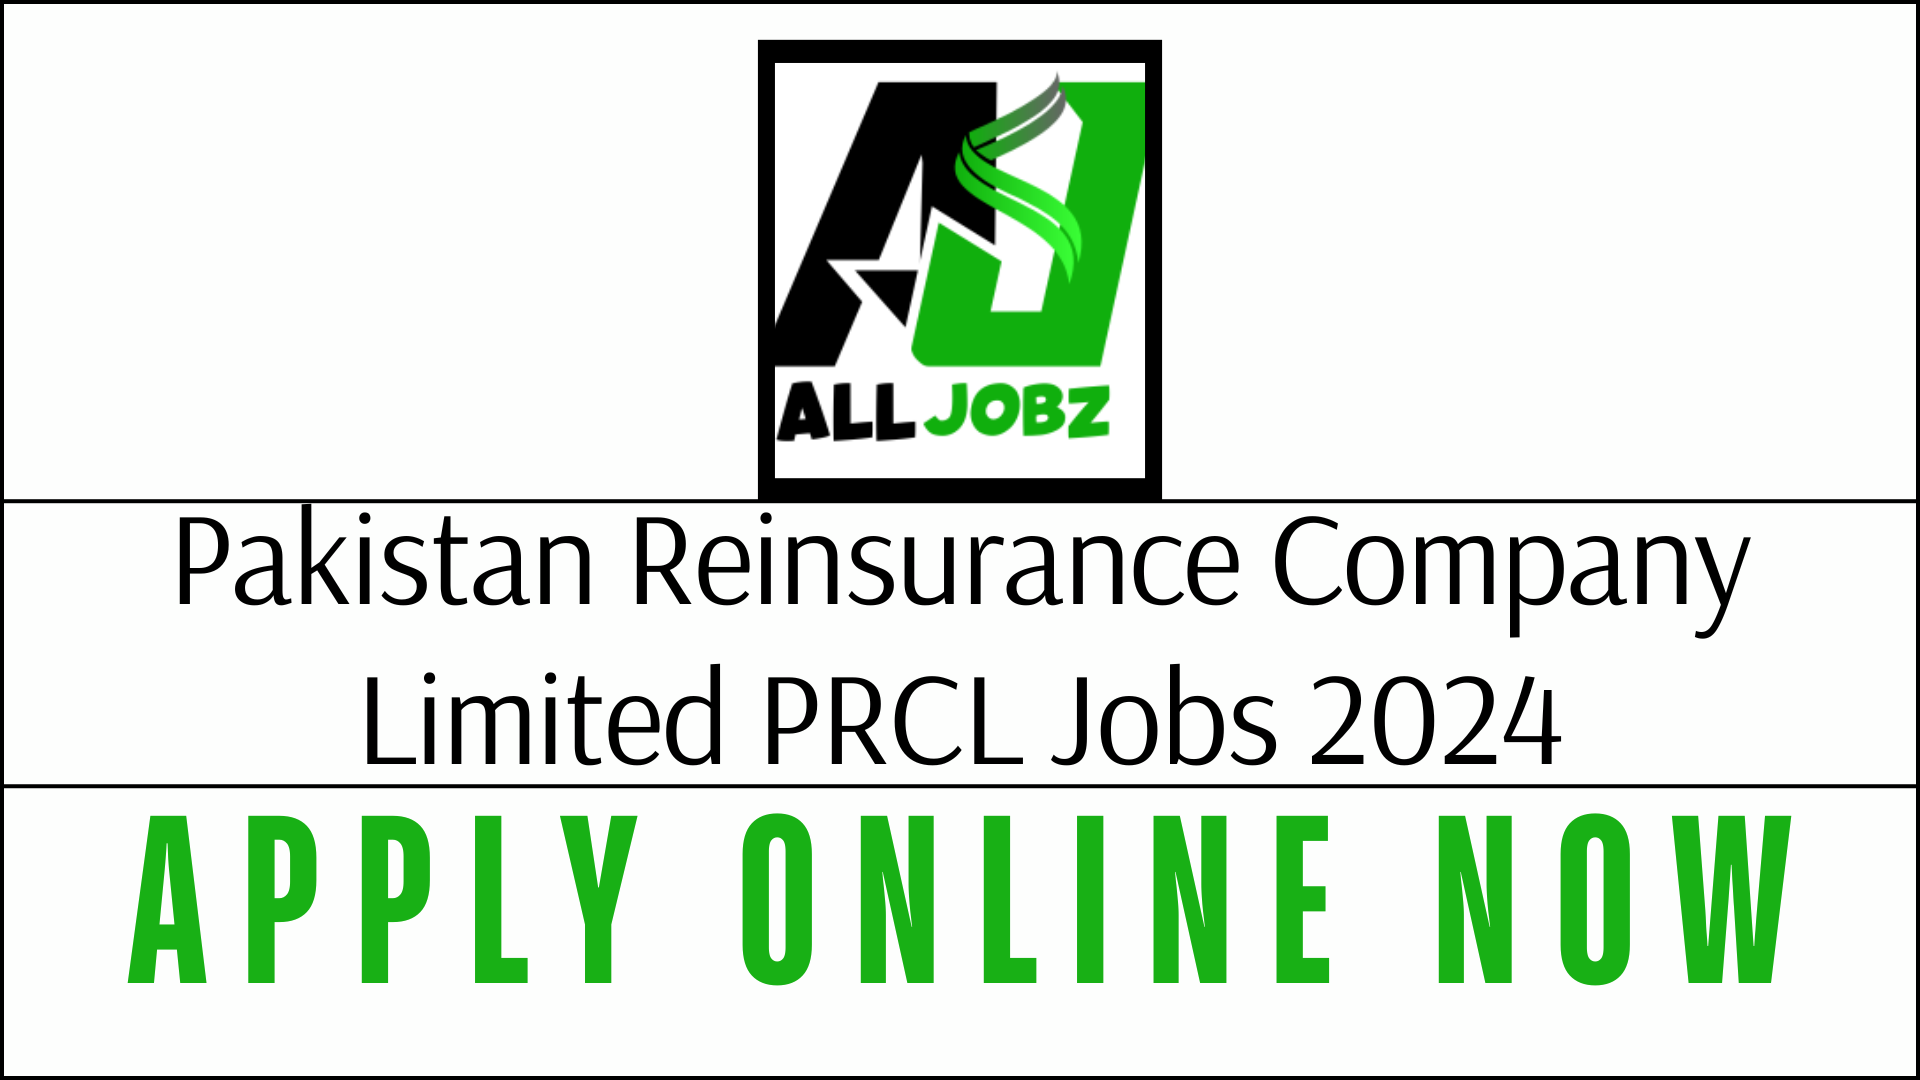 Career Opportunities At Pakistan Reinsurance Company Limited Prcl For Claims, Taxation, Re Takaful (Accounts), Investment, Senior Management Executive - Underwriting, Senior Management Executive - Underwriting (Retrocession), Human Resources (Hr Generalist), Audit Department, Risk Management, Management Executive - Compliance, Corporate Affairs, Pakistan Reinsurance Company Limited Jobs Salary, Pakistan Reinsurance Company Limited Salary, Pakistan Reinsurance Company Limited Financials Jobs, Pakistan Reinsurance Company Limited Jobs 2024 Online Apply,